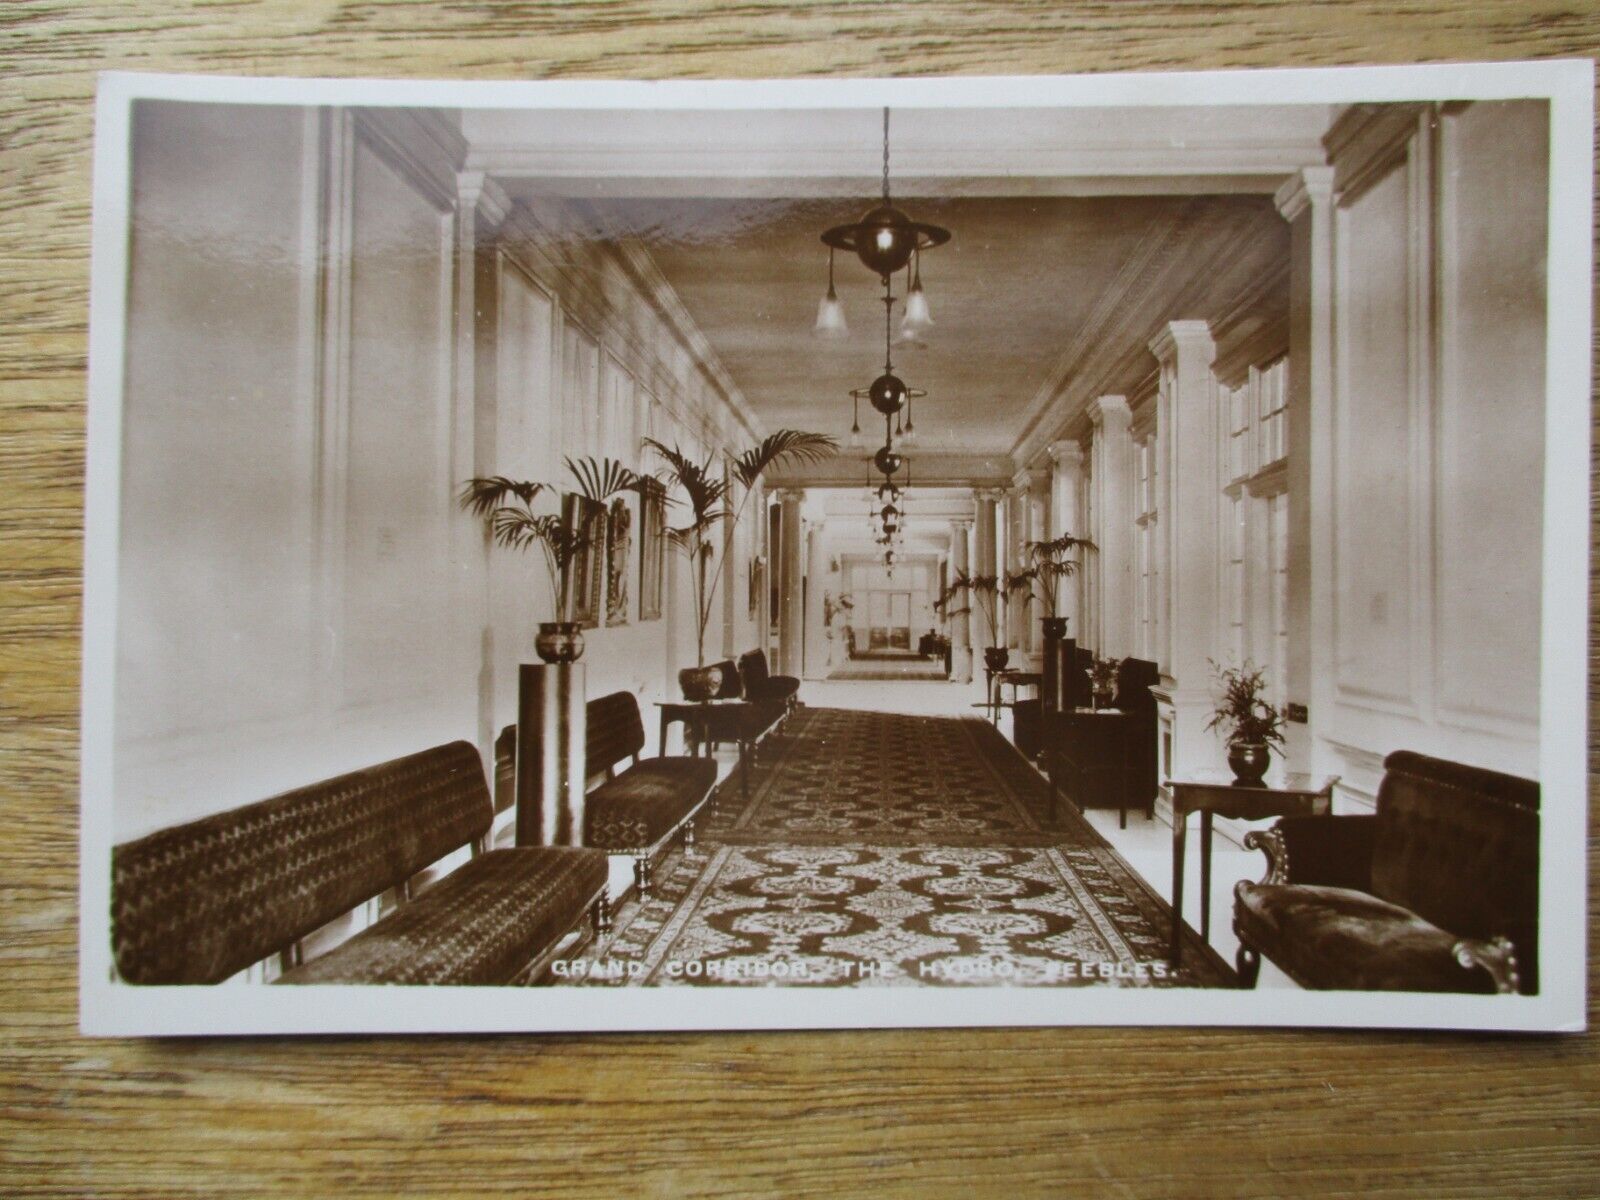 House Clearance - PEEBLES HYDRO, THE GRAND CORRIDOR, R/P, LOCAL PUBLISHER